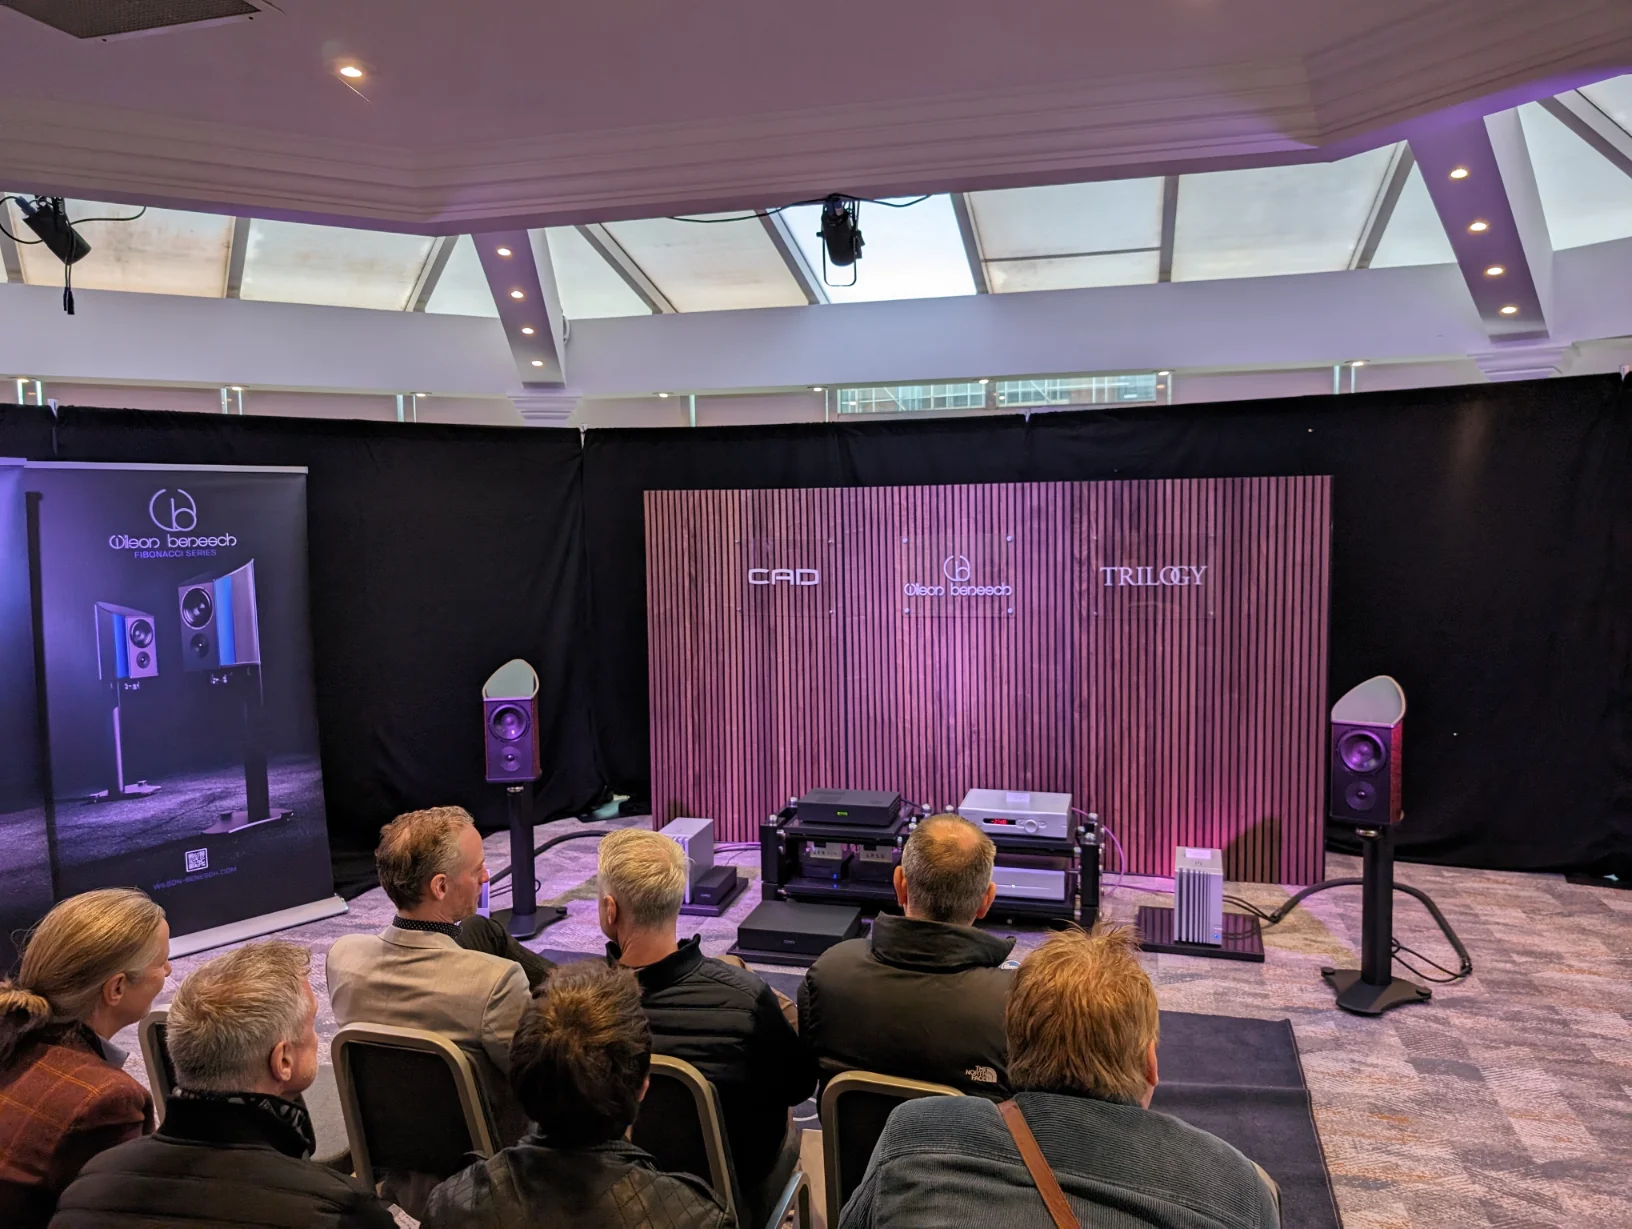 The Discovery 3Zero did an incredible job considering the size of the room they had to work with. This was another room we didn’t manage to spot an empty seat at any point, testament to their captivating performance.